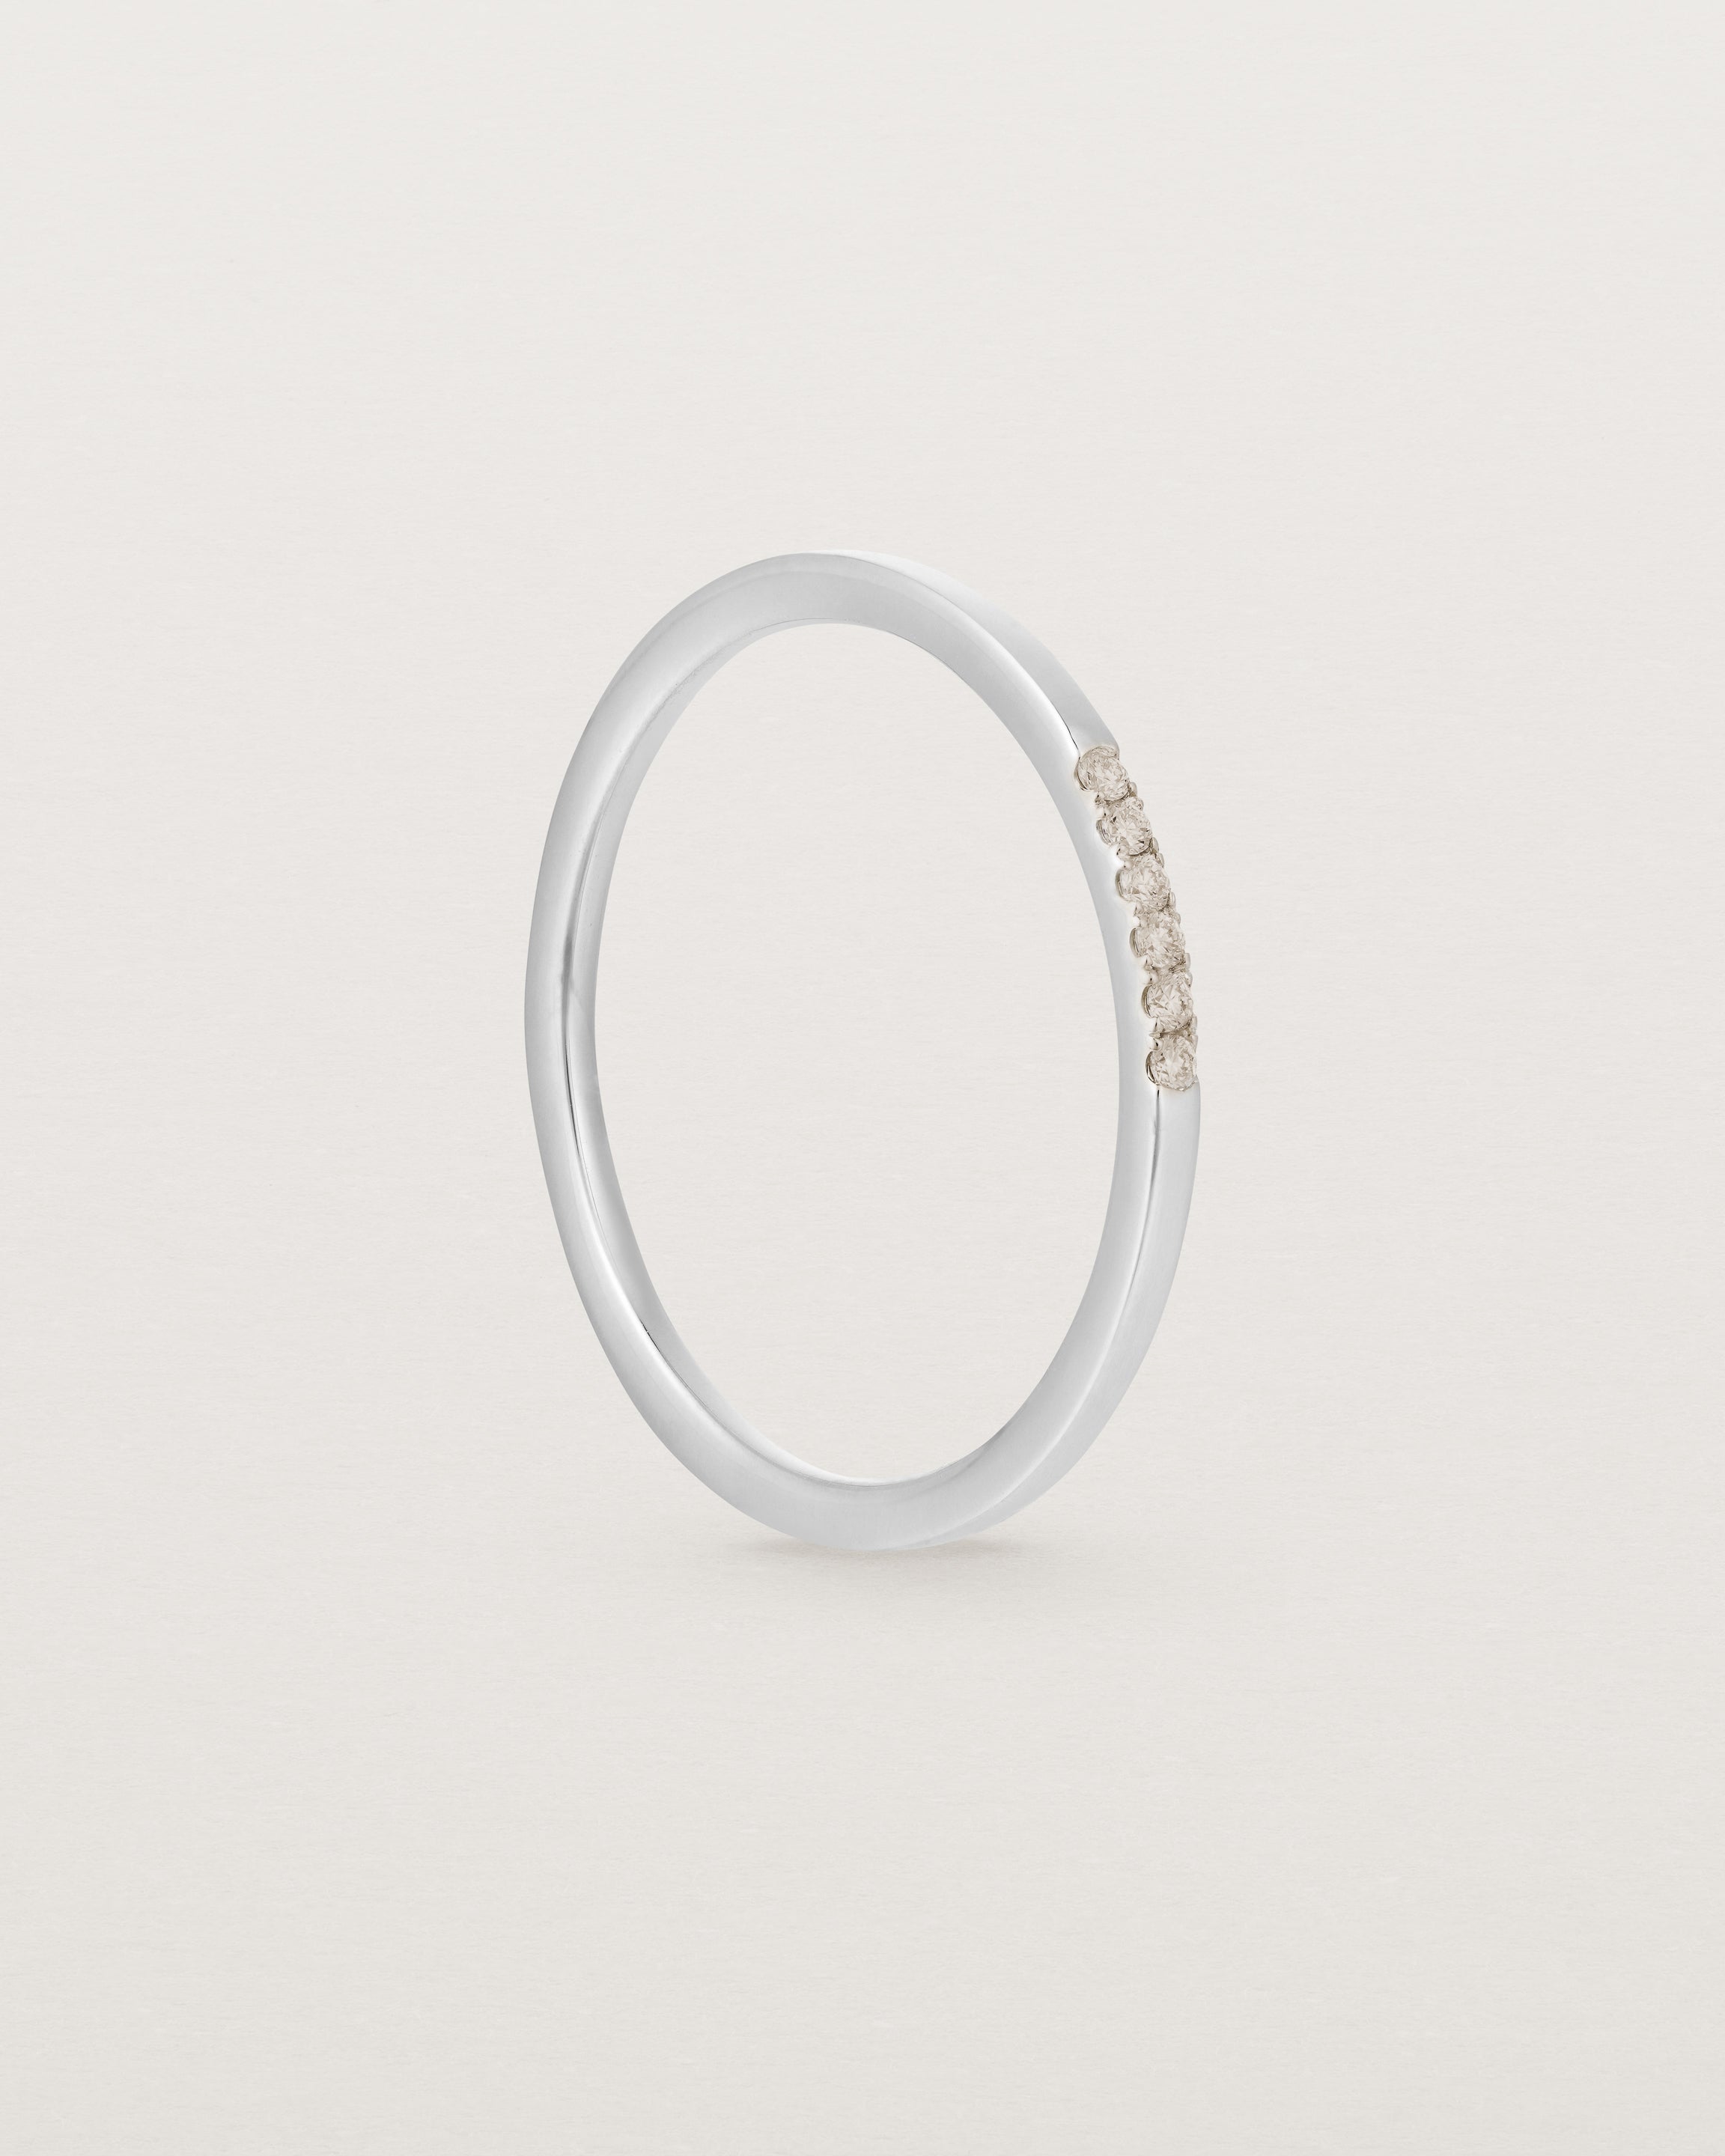 Standing view of the Six Stone Queenie Ring | Champagne Diamonds | White Gold.